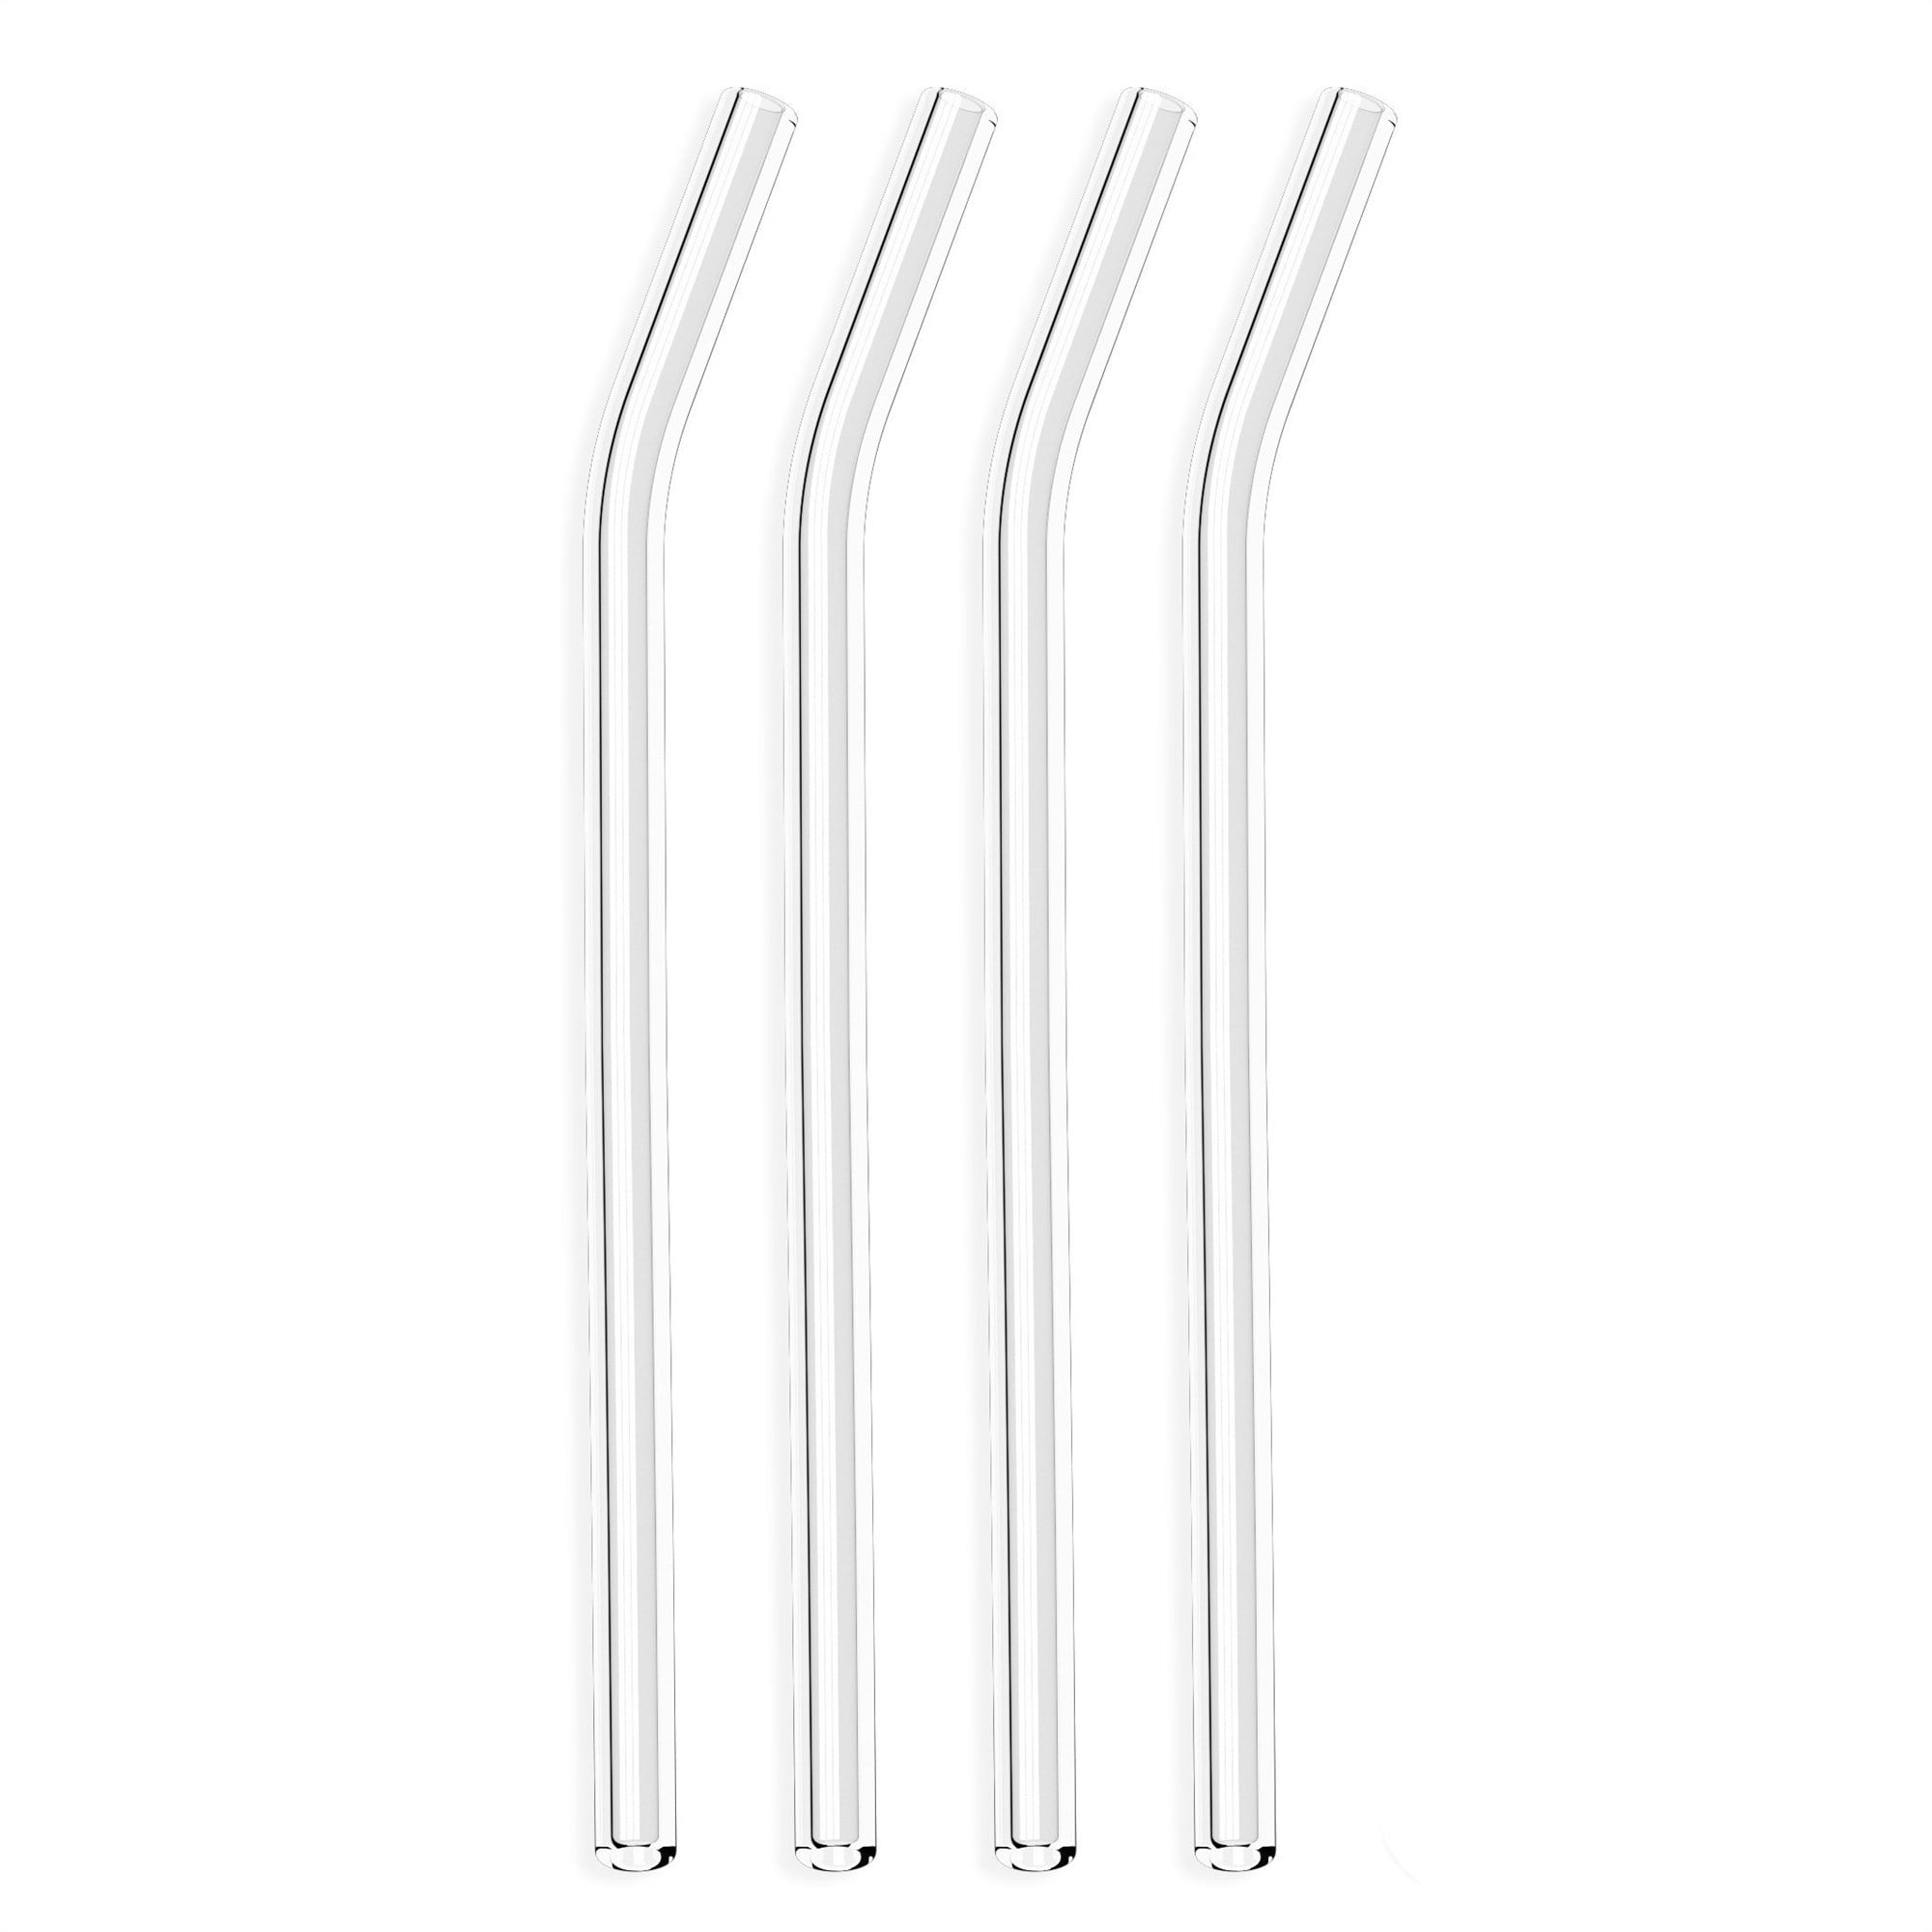 2 Brushes ECO UK 8 x Stainless Steel Metal Drinking Straw Straws Bent Reusable